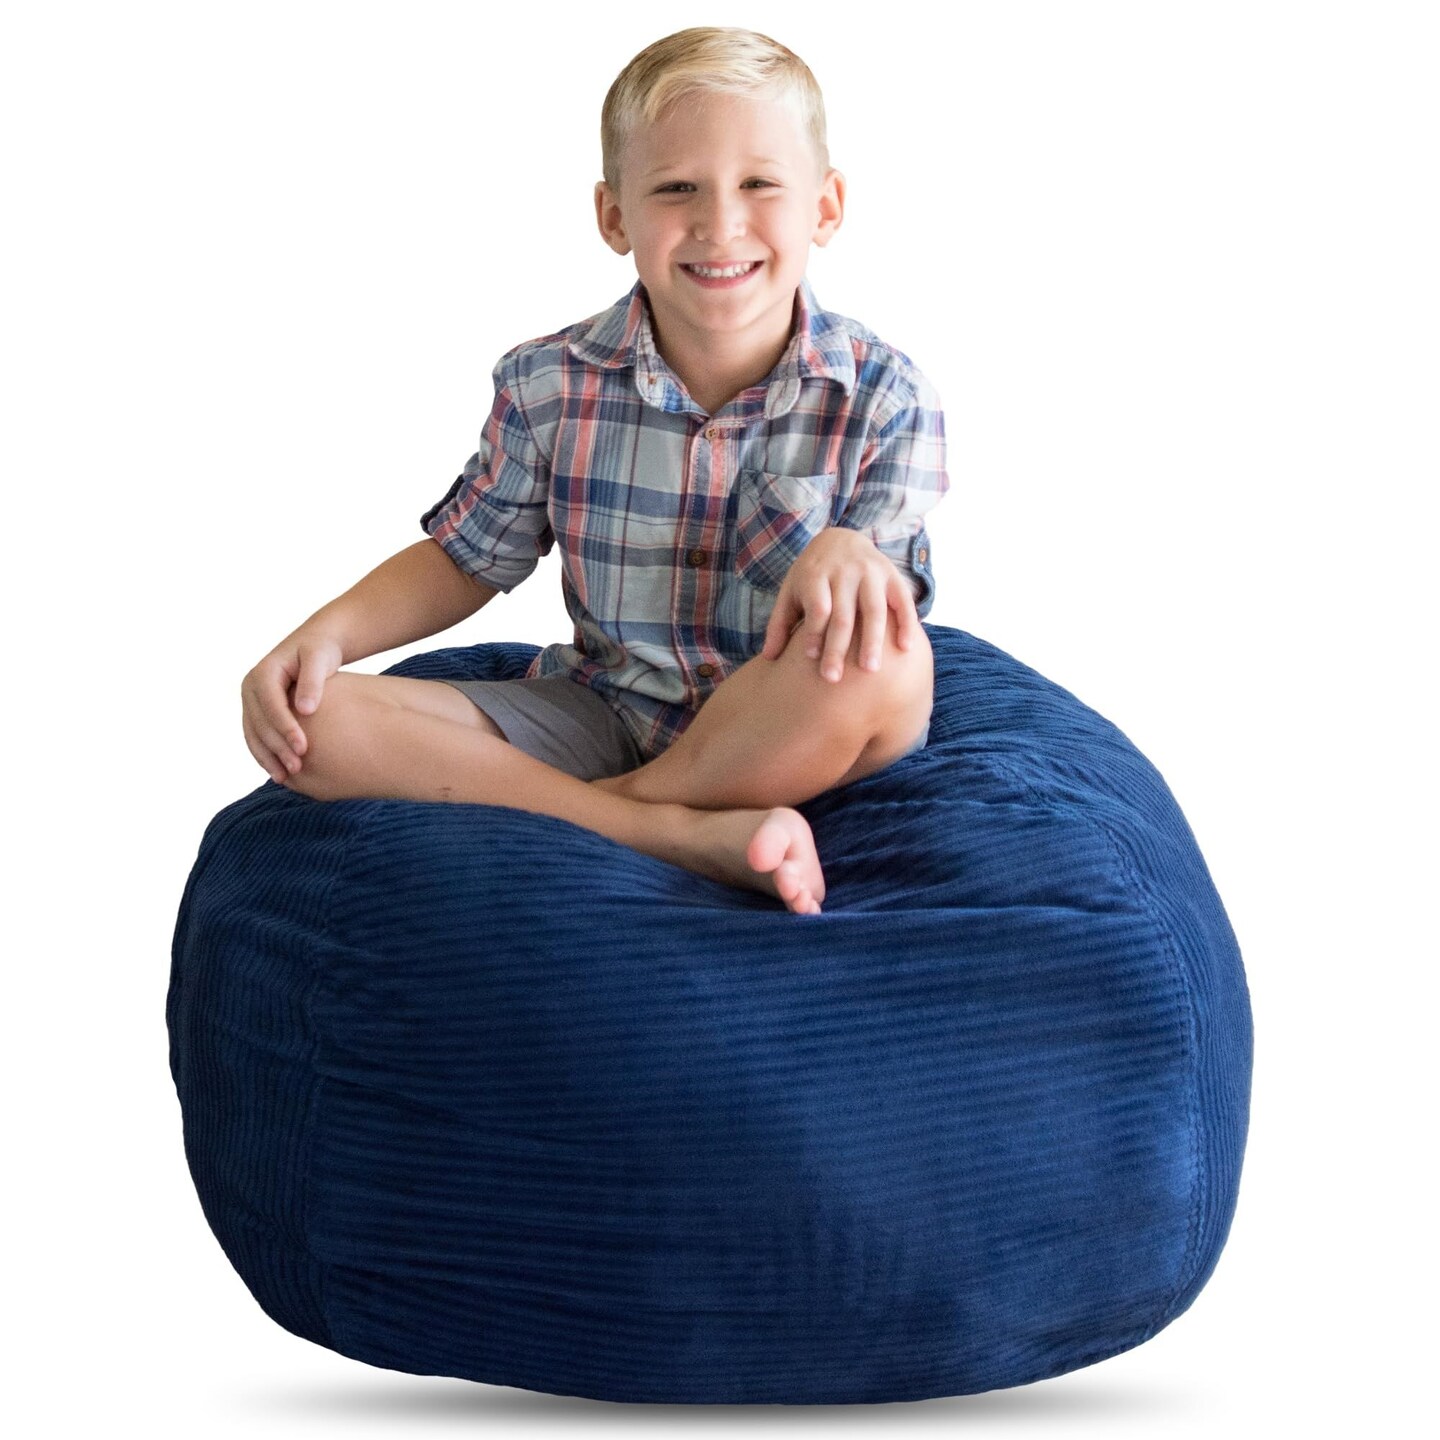 Creative QT Stuff &#x2019;n Sit Extra Large 38&#x2019;&#x2019; Bean Bag Storage Cover for Stuffed Animals &#x26; Toys, Giant Beanbag Chair for Plush, Toddler &#x26; Kids Rooms Bedroom Organizer, Royal Blue Corduroy